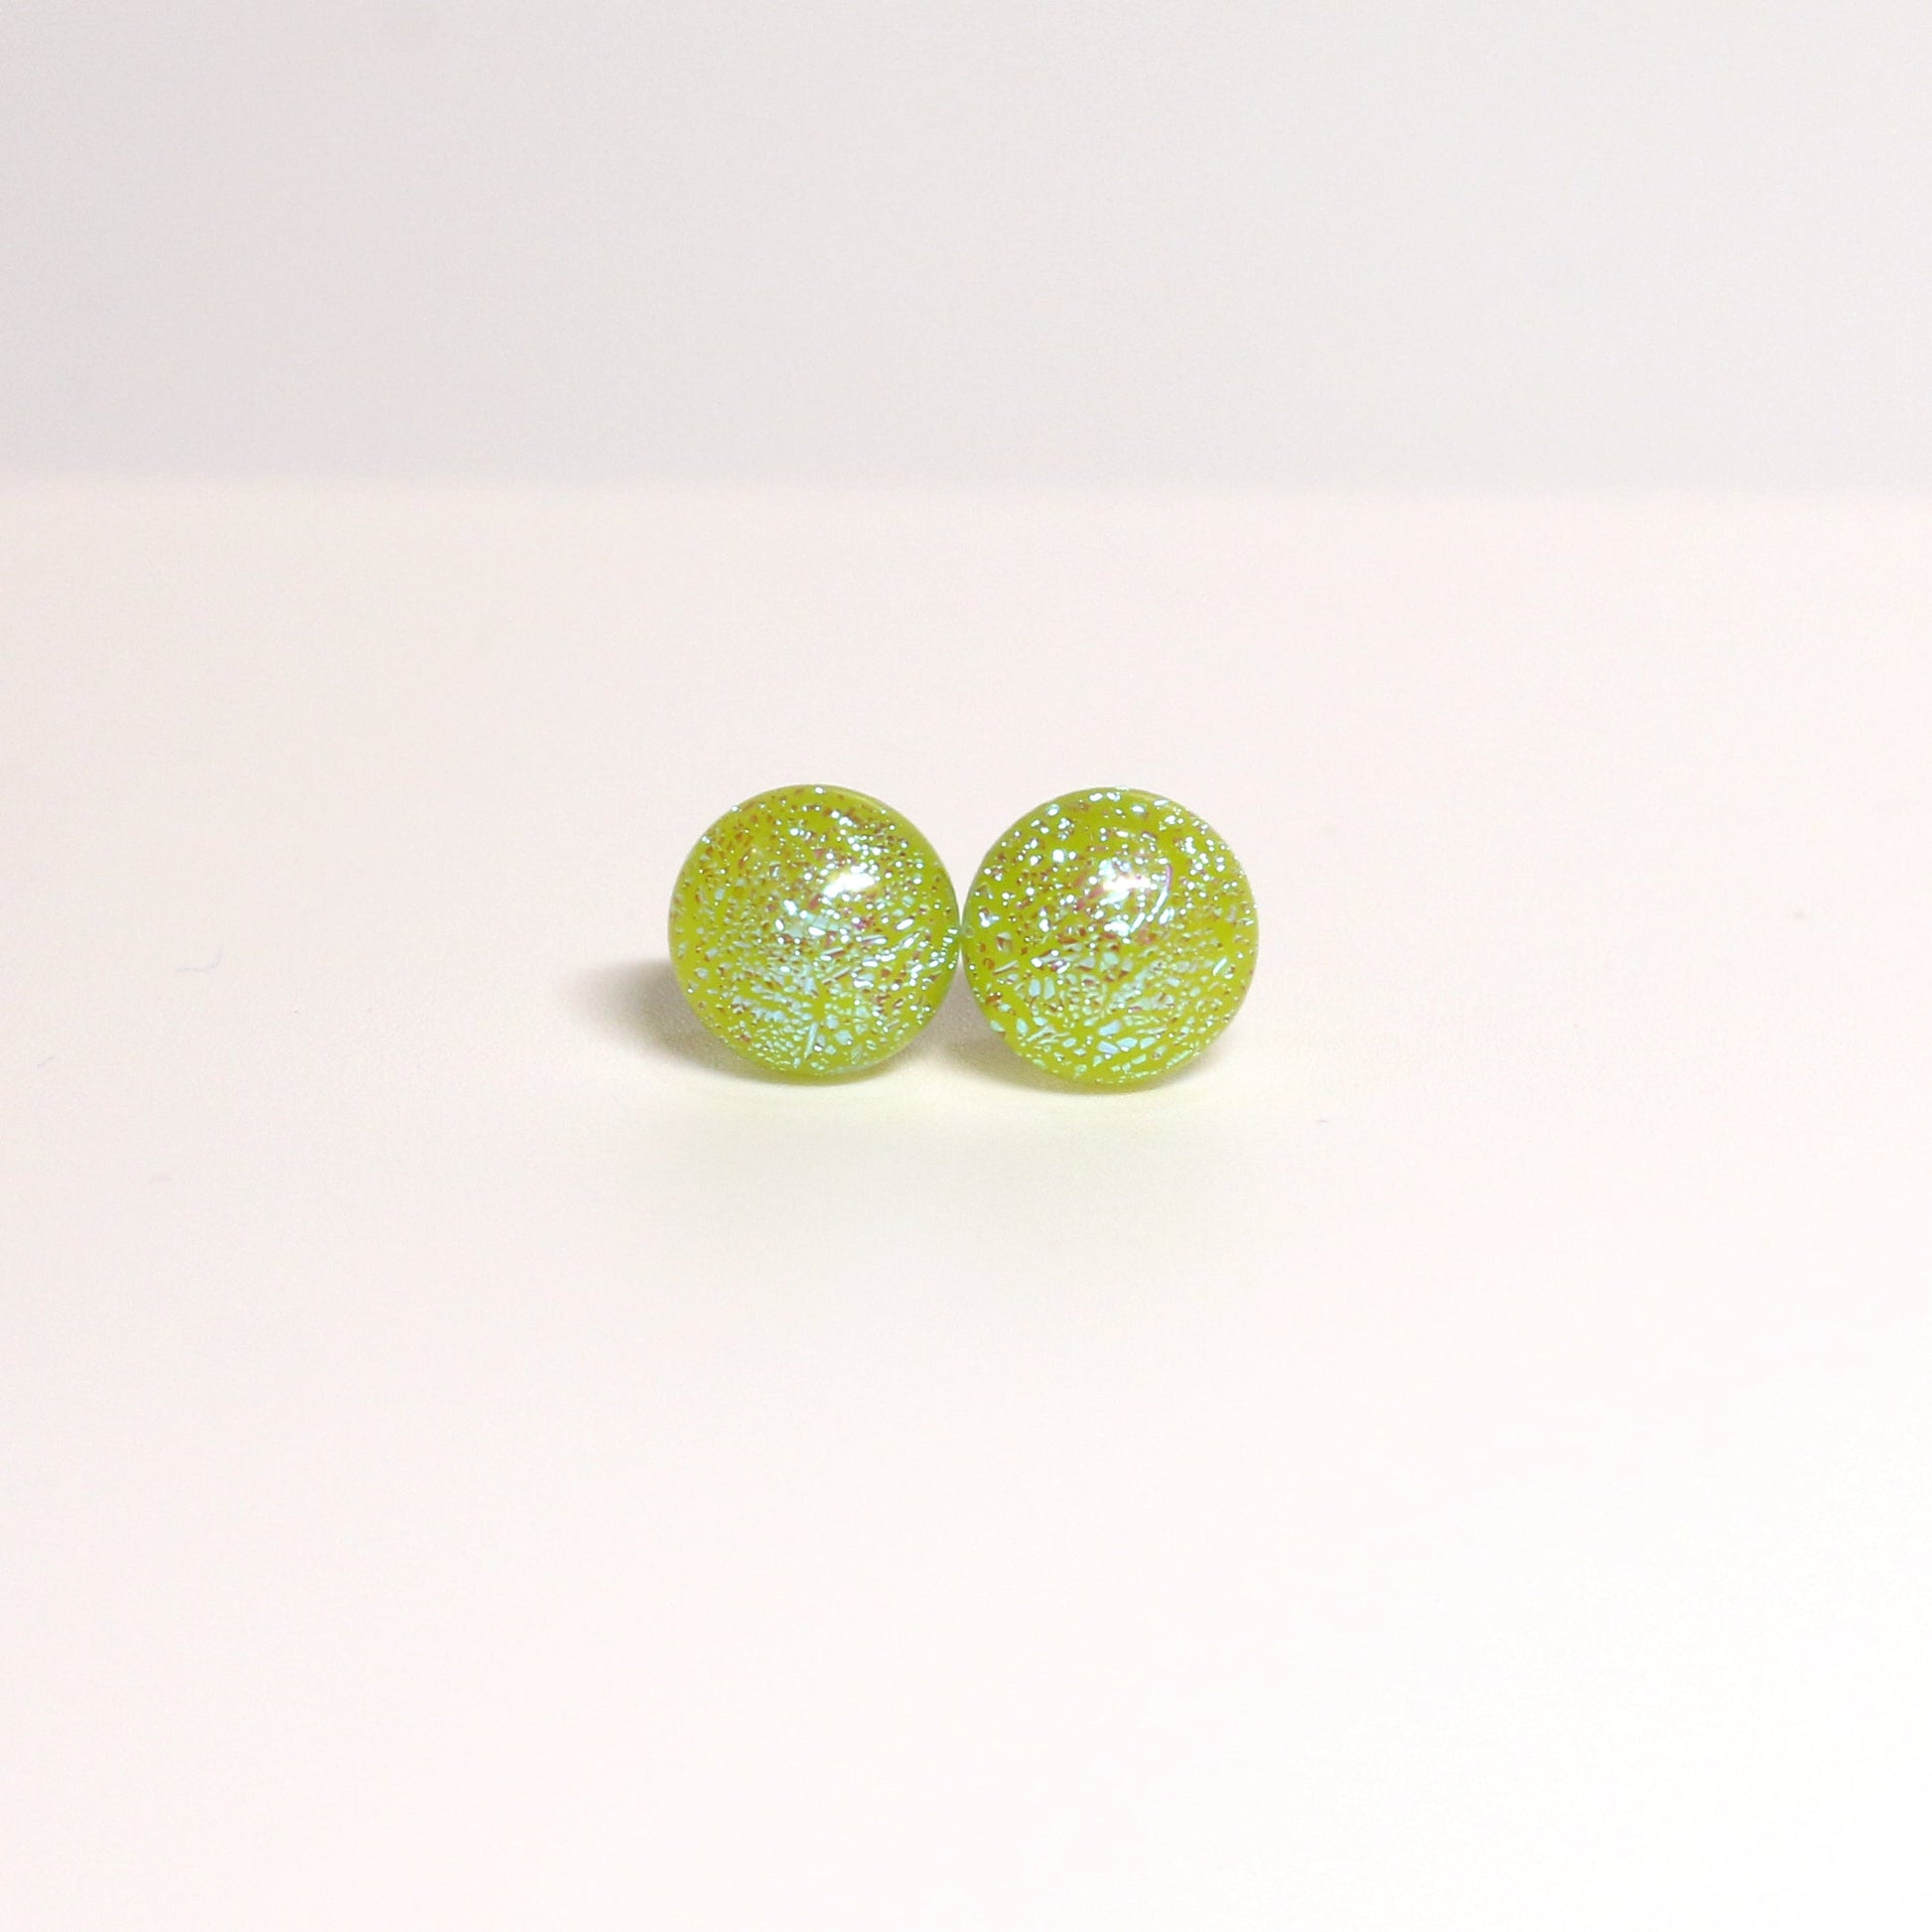 Tiny Dichroic Fused Glass Earring Studs - 3827